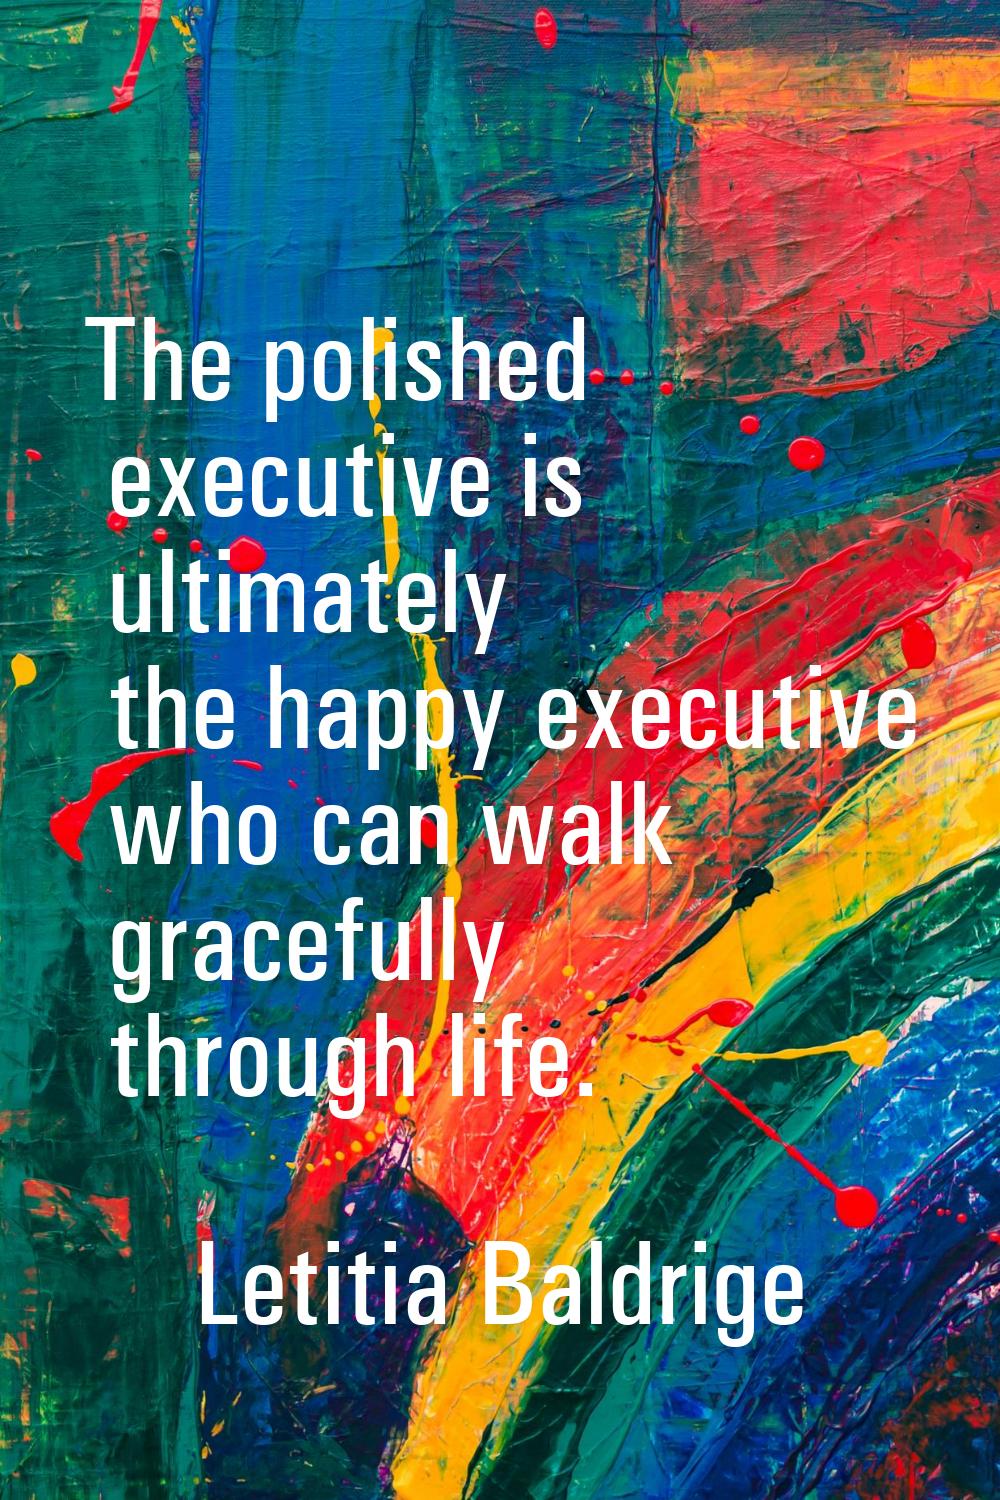 The polished executive is ultimately the happy executive who can walk gracefully through life.